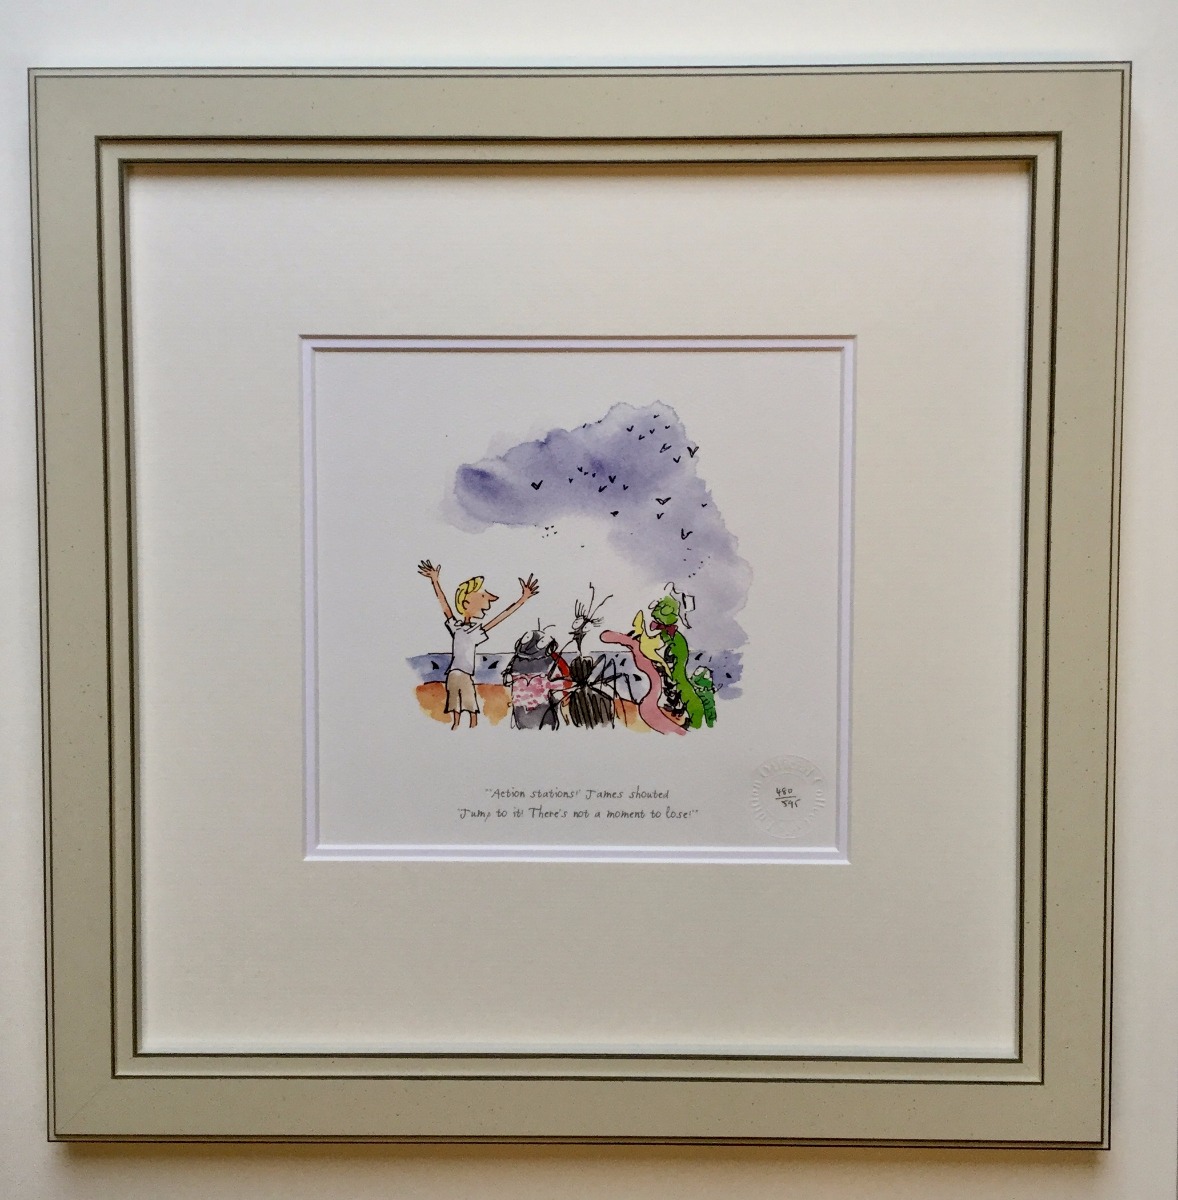 Action Stations! - James Shouted by Quentin Blake